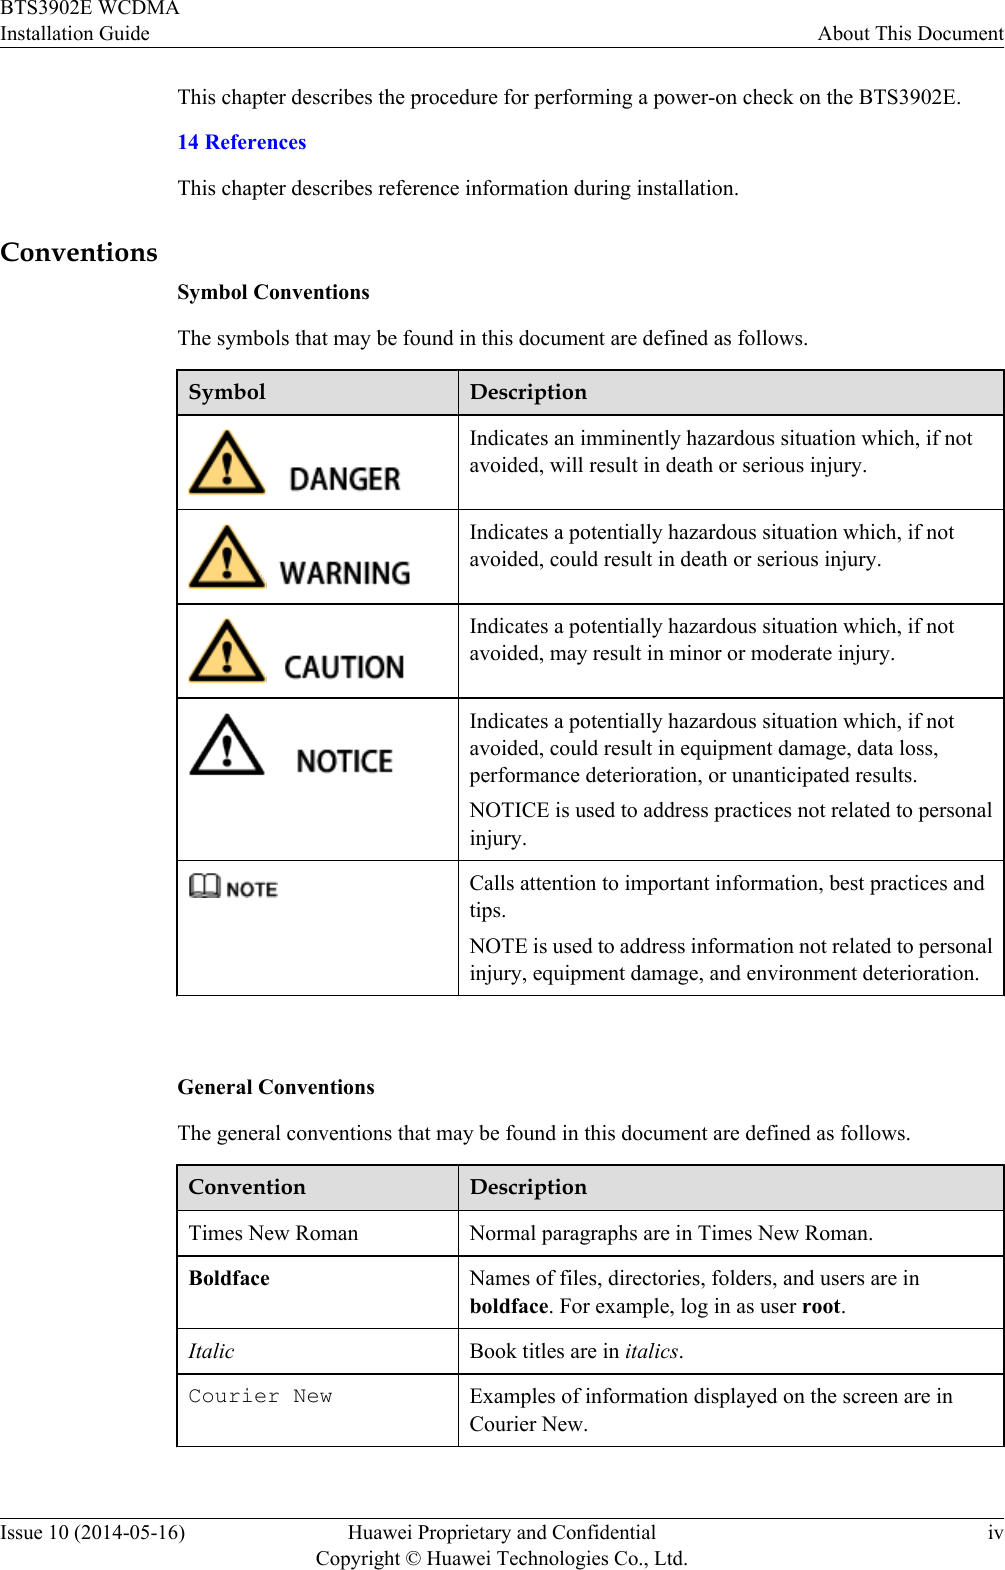 This chapter describes the procedure for performing a power-on check on the BTS3902E.14 ReferencesThis chapter describes reference information during installation.ConventionsSymbol ConventionsThe symbols that may be found in this document are defined as follows.Symbol DescriptionIndicates an imminently hazardous situation which, if notavoided, will result in death or serious injury.Indicates a potentially hazardous situation which, if notavoided, could result in death or serious injury.Indicates a potentially hazardous situation which, if notavoided, may result in minor or moderate injury.Indicates a potentially hazardous situation which, if notavoided, could result in equipment damage, data loss,performance deterioration, or unanticipated results.NOTICE is used to address practices not related to personalinjury.Calls attention to important information, best practices andtips.NOTE is used to address information not related to personalinjury, equipment damage, and environment deterioration. General ConventionsThe general conventions that may be found in this document are defined as follows.Convention DescriptionTimes New Roman Normal paragraphs are in Times New Roman.Boldface Names of files, directories, folders, and users are inboldface. For example, log in as user root.Italic Book titles are in italics.Courier New Examples of information displayed on the screen are inCourier New. BTS3902E WCDMAInstallation Guide About This DocumentIssue 10 (2014-05-16) Huawei Proprietary and ConfidentialCopyright © Huawei Technologies Co., Ltd.iv